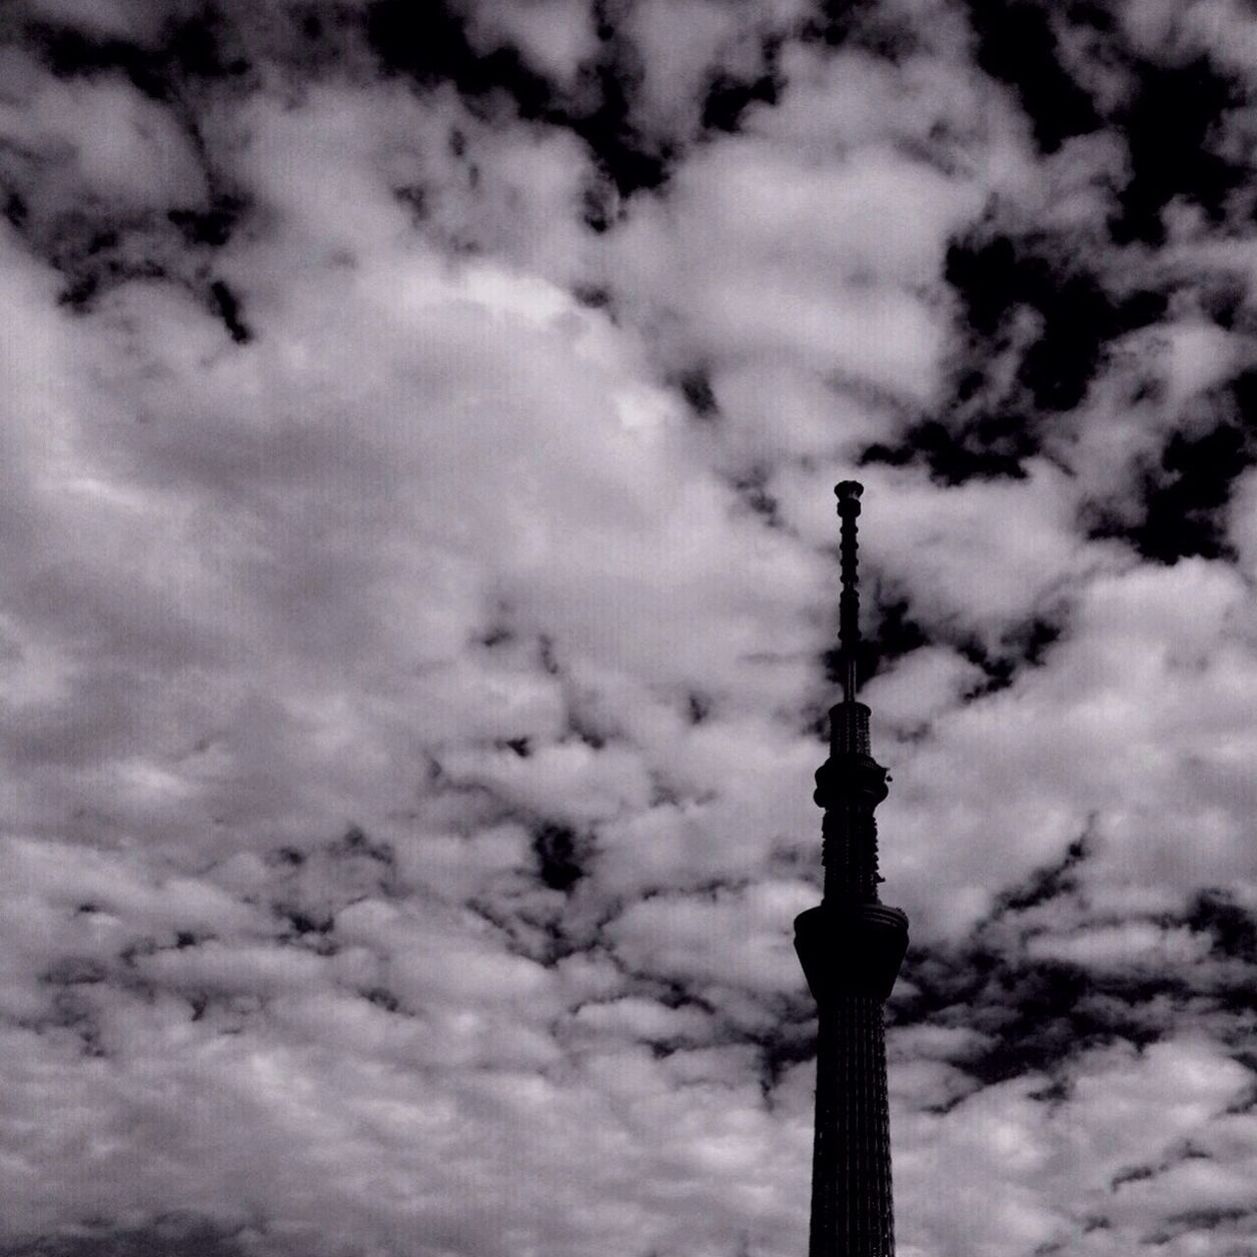 sky, low angle view, cloud - sky, cloudy, tower, built structure, architecture, communications tower, tall - high, communication, building exterior, cloud, travel destinations, famous place, international landmark, television tower, spire, weather, capital cities, tourism